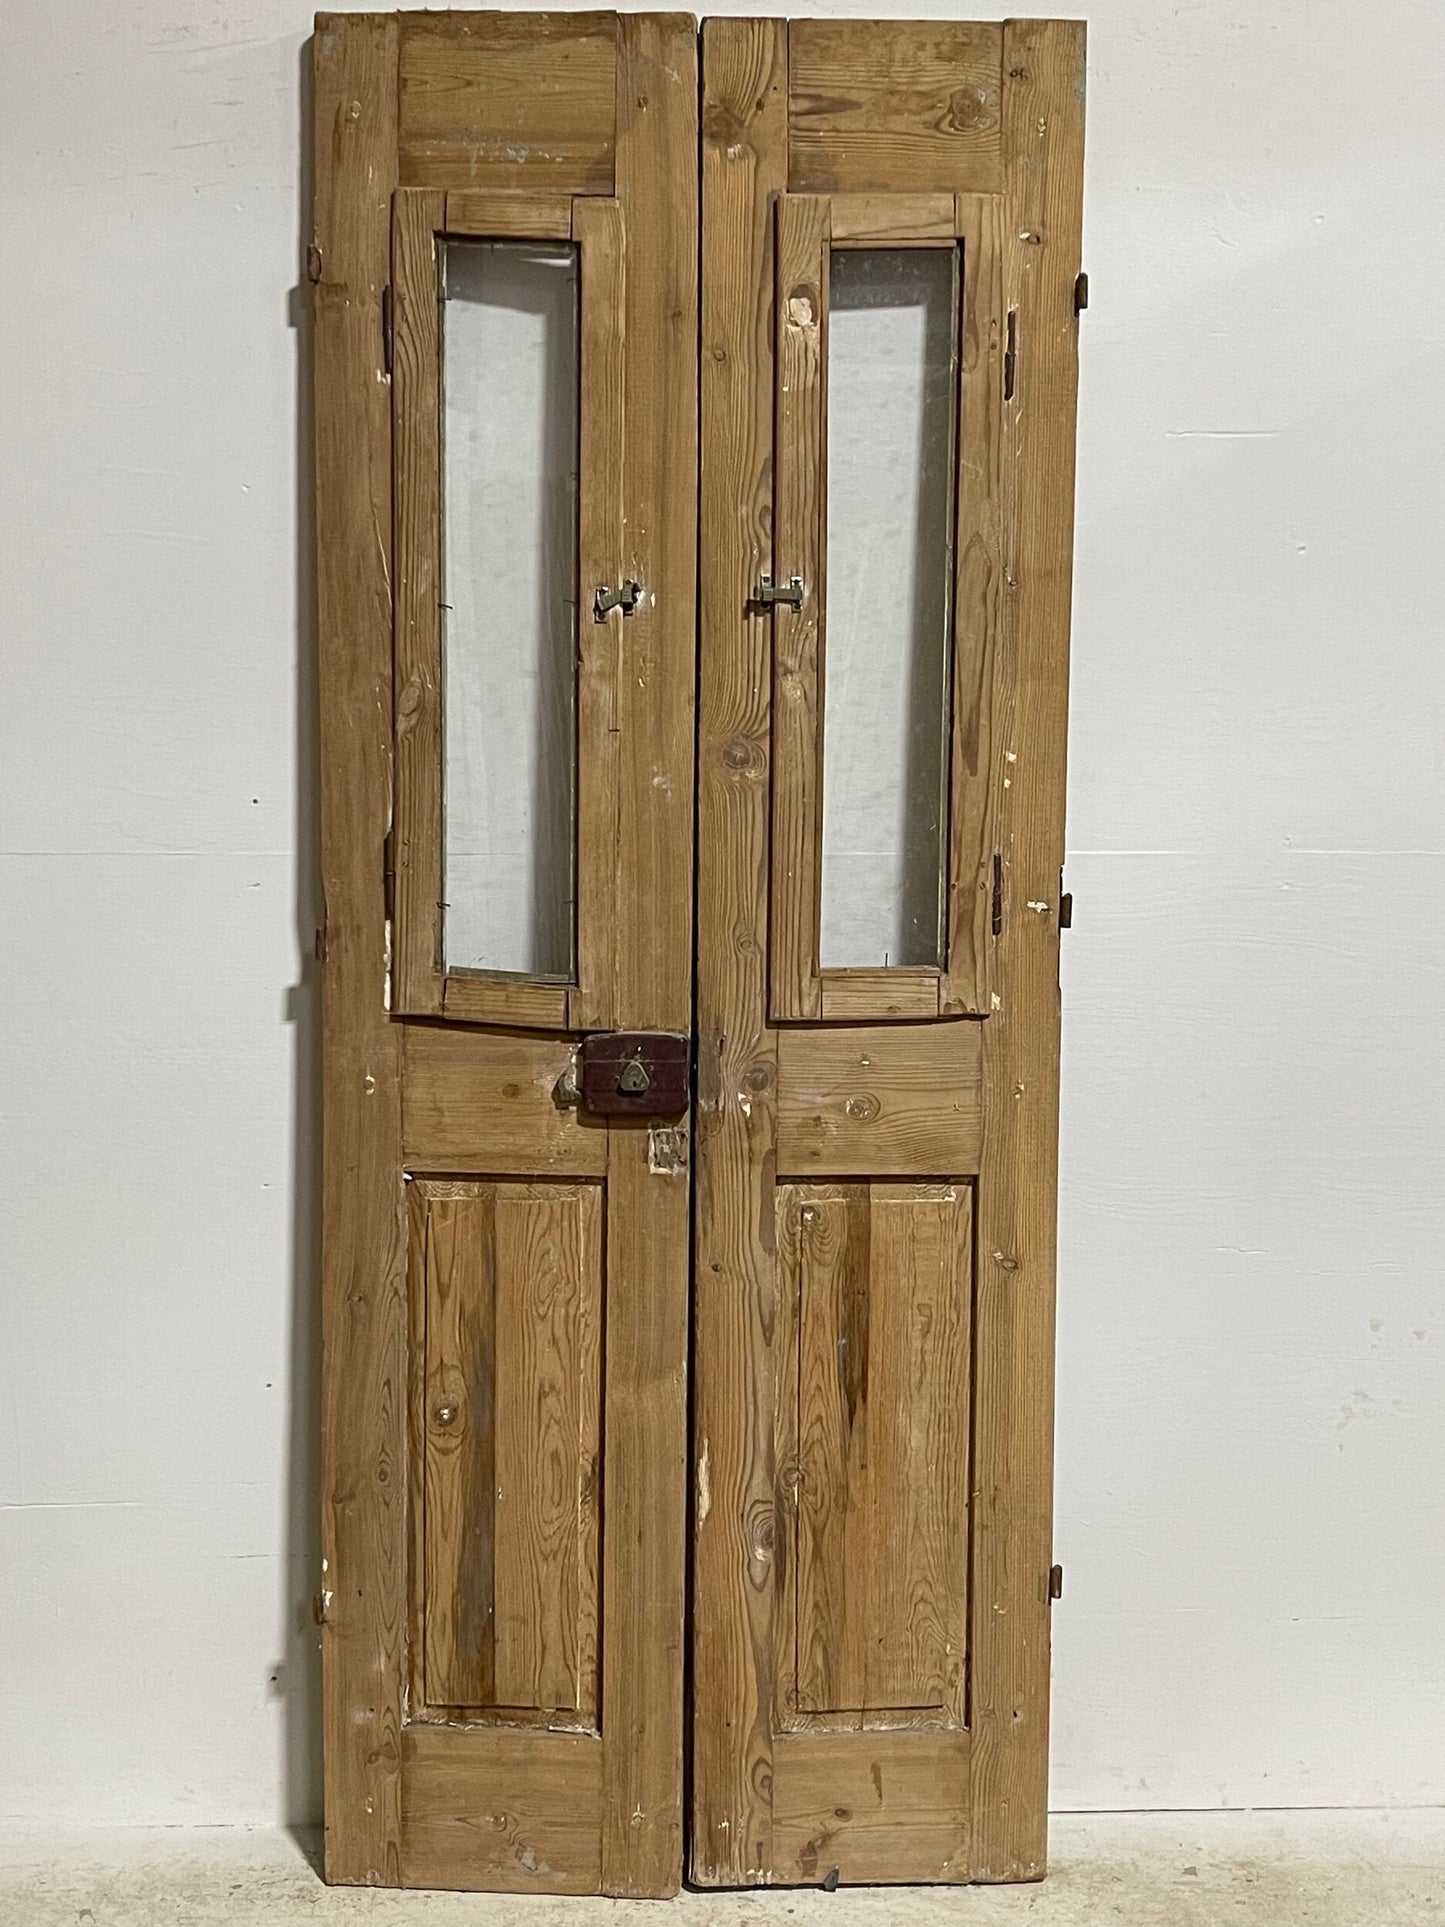 Antique French doors with glass (84.25x33.5) H0105s